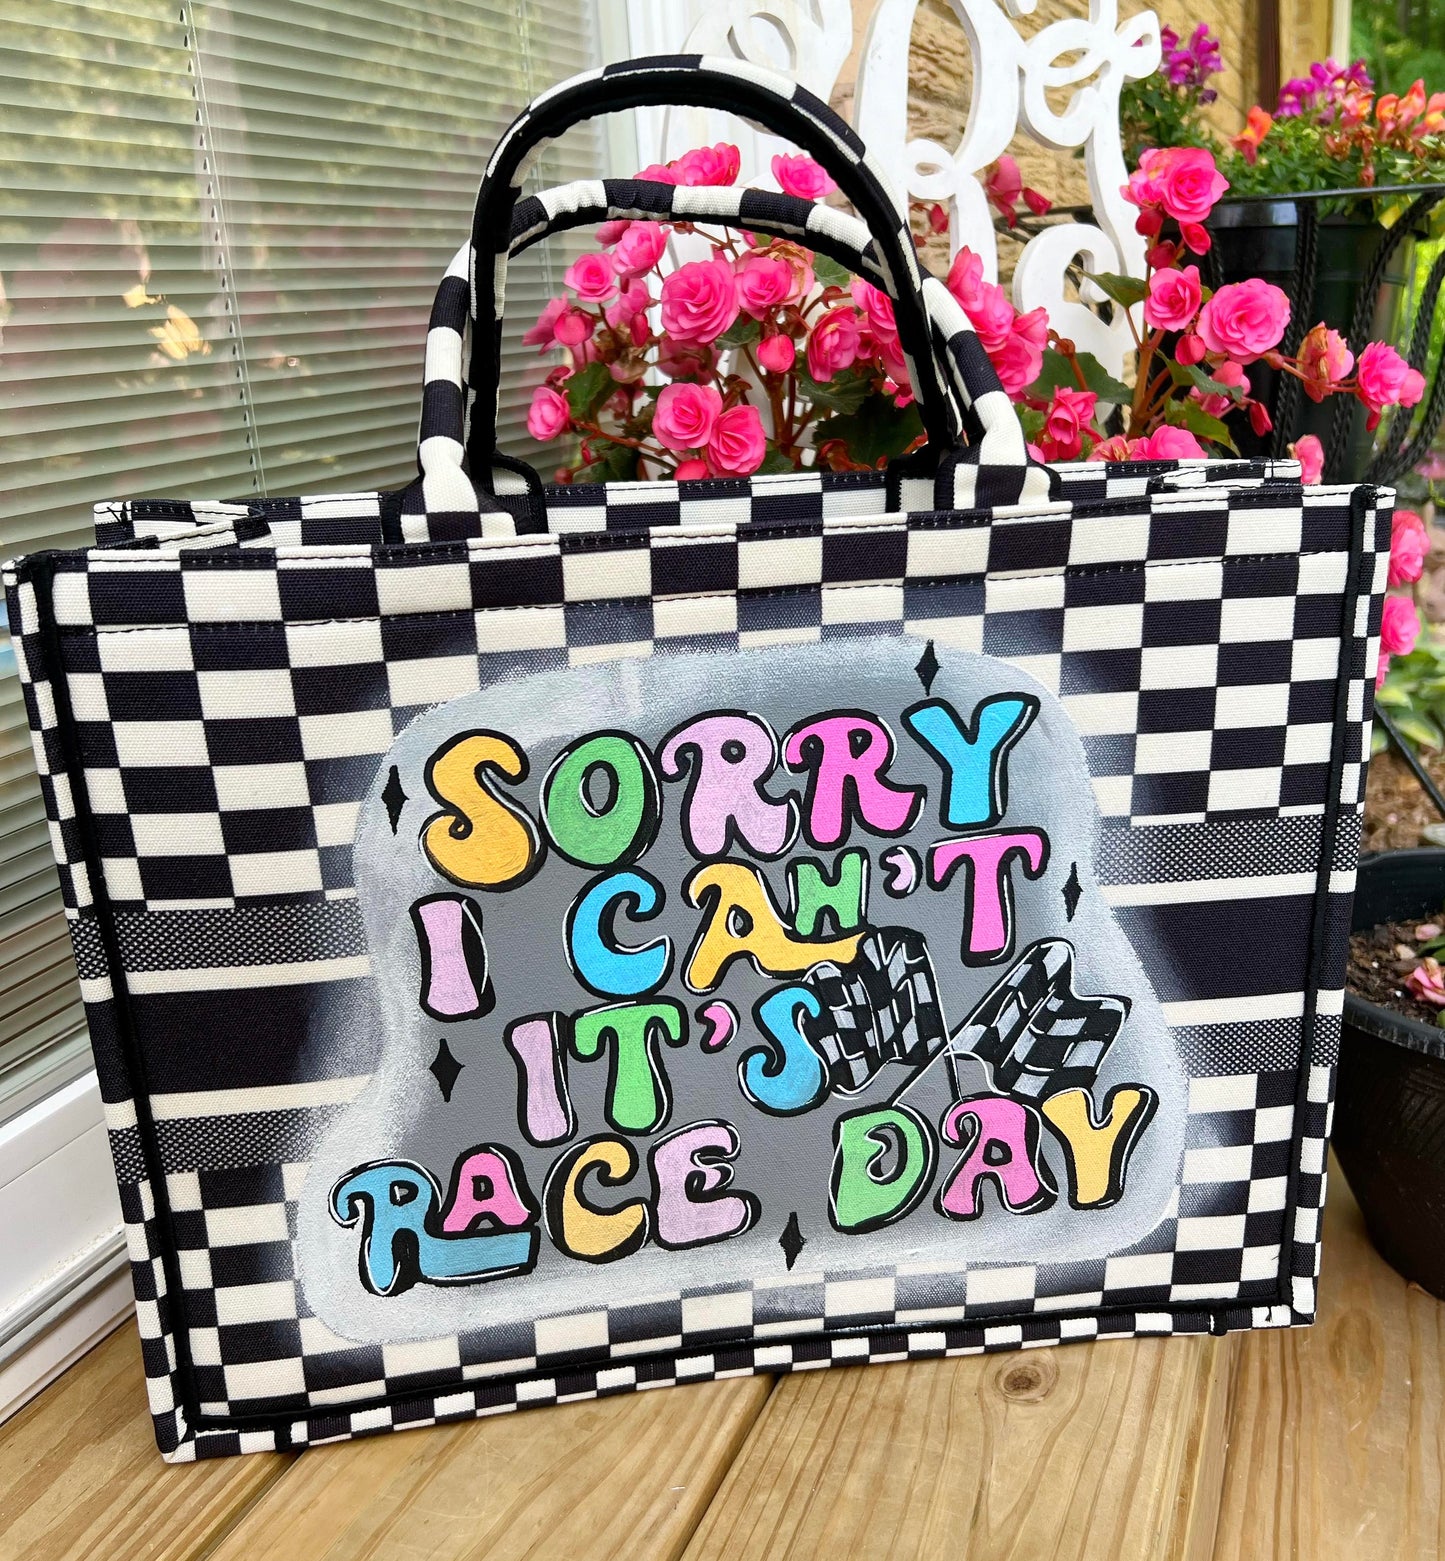 Painted Tote "Sorry I Can't It's Race Day"